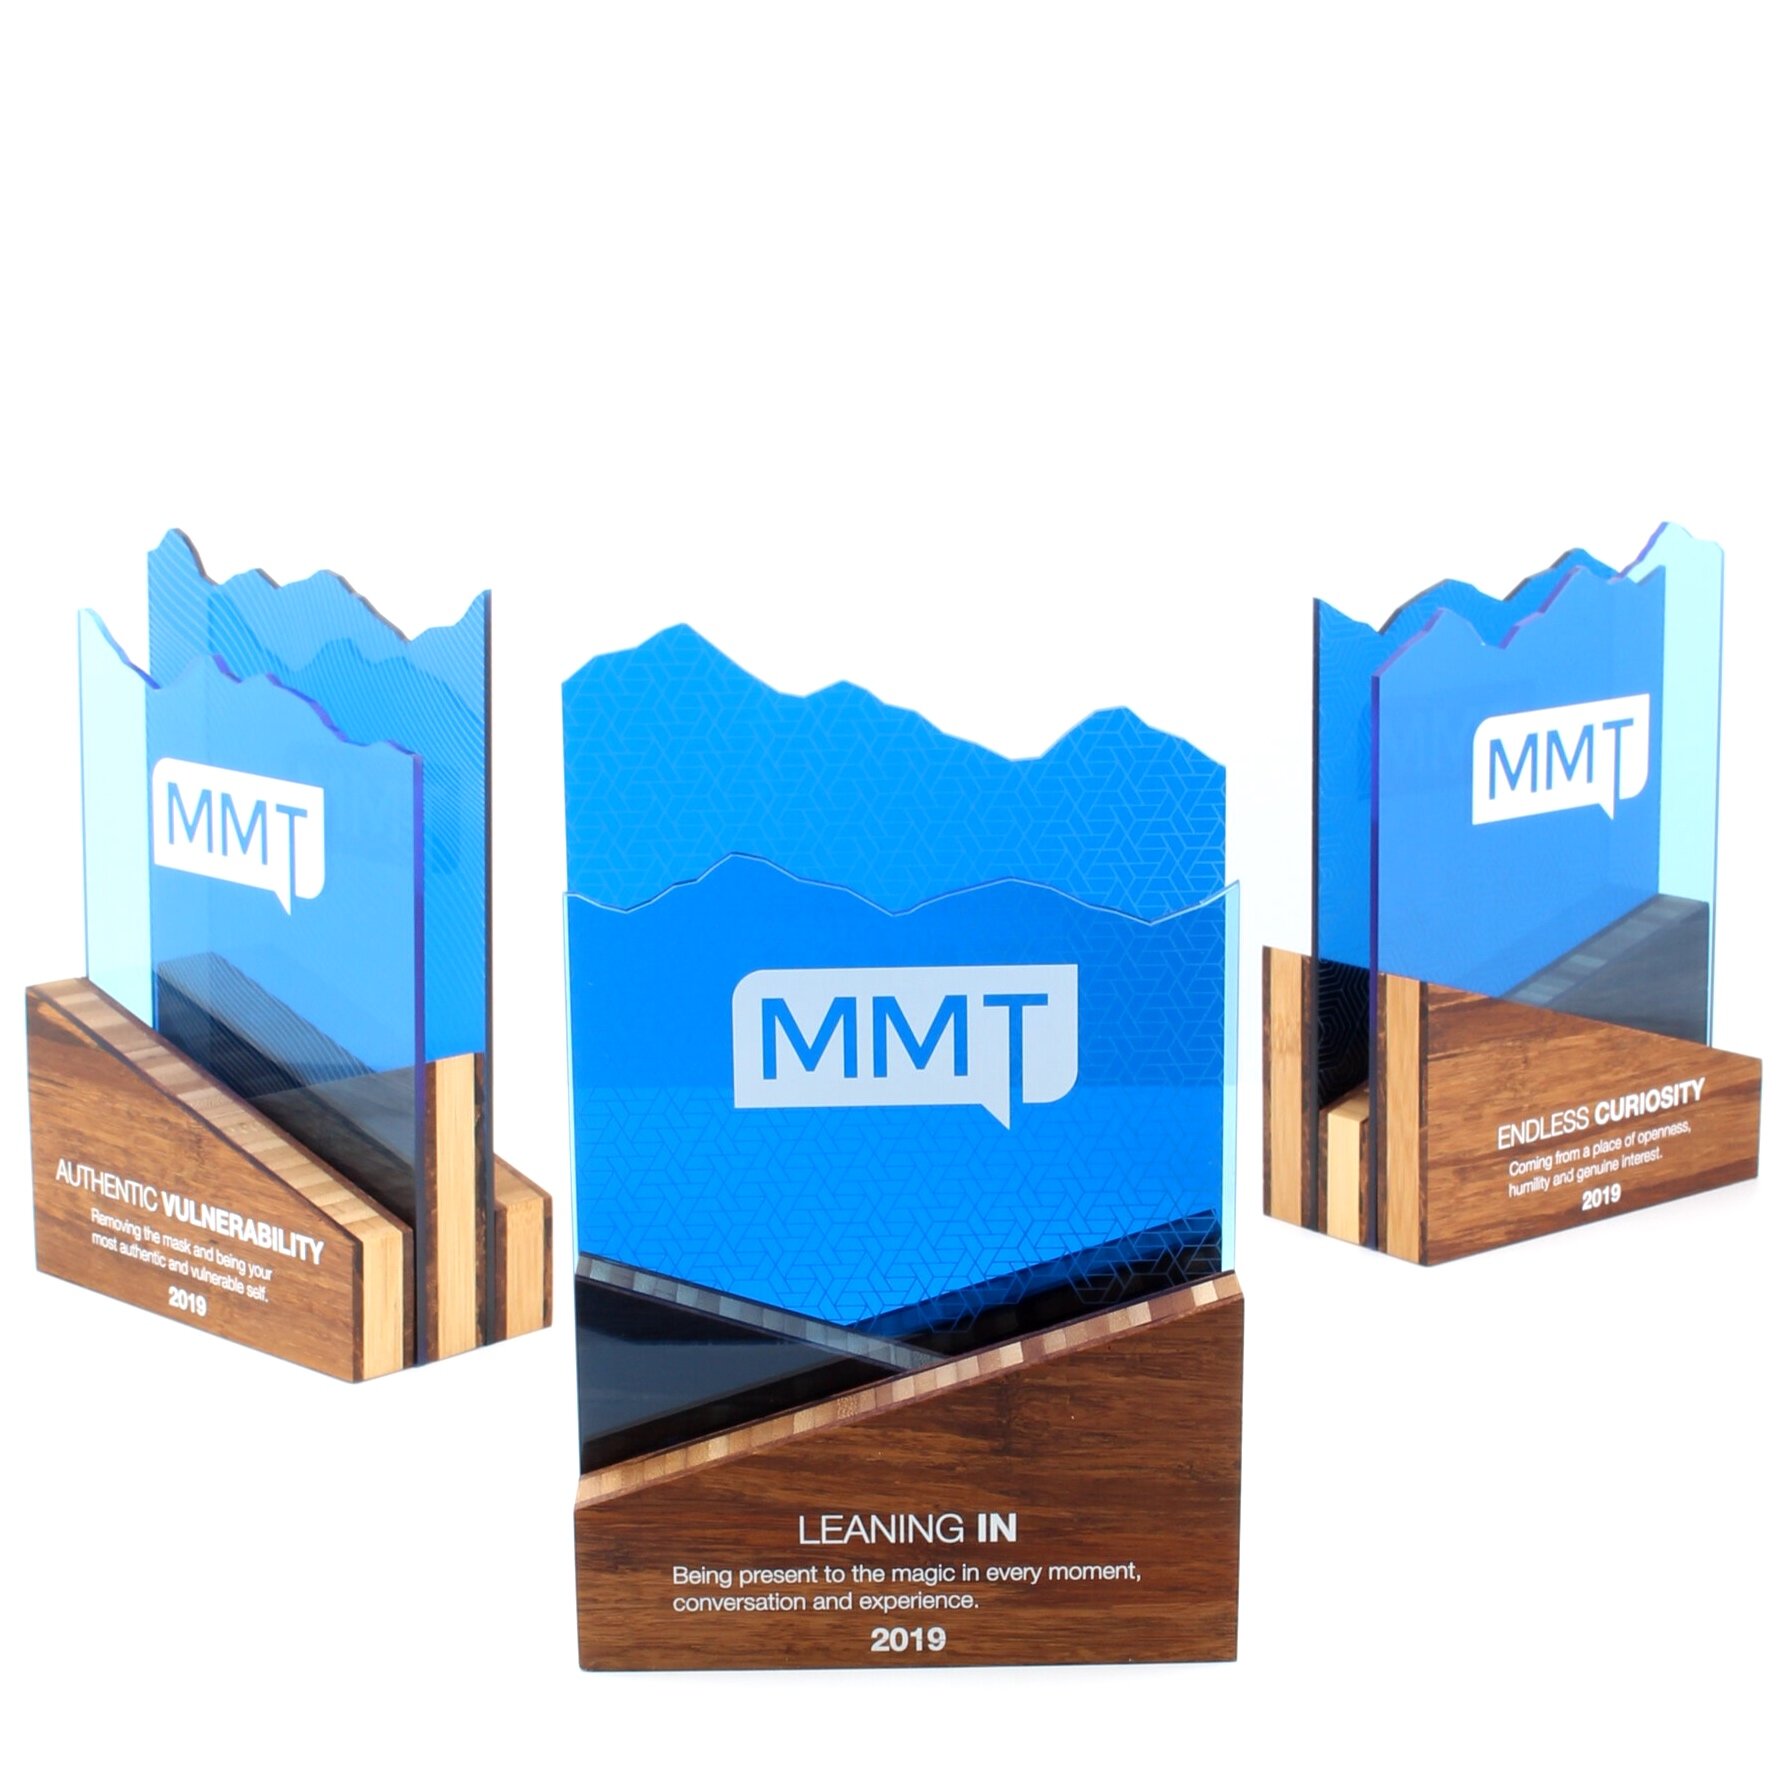 MMT+core+values+trophies+awards+yearly+staff+appreciation+3.jpg